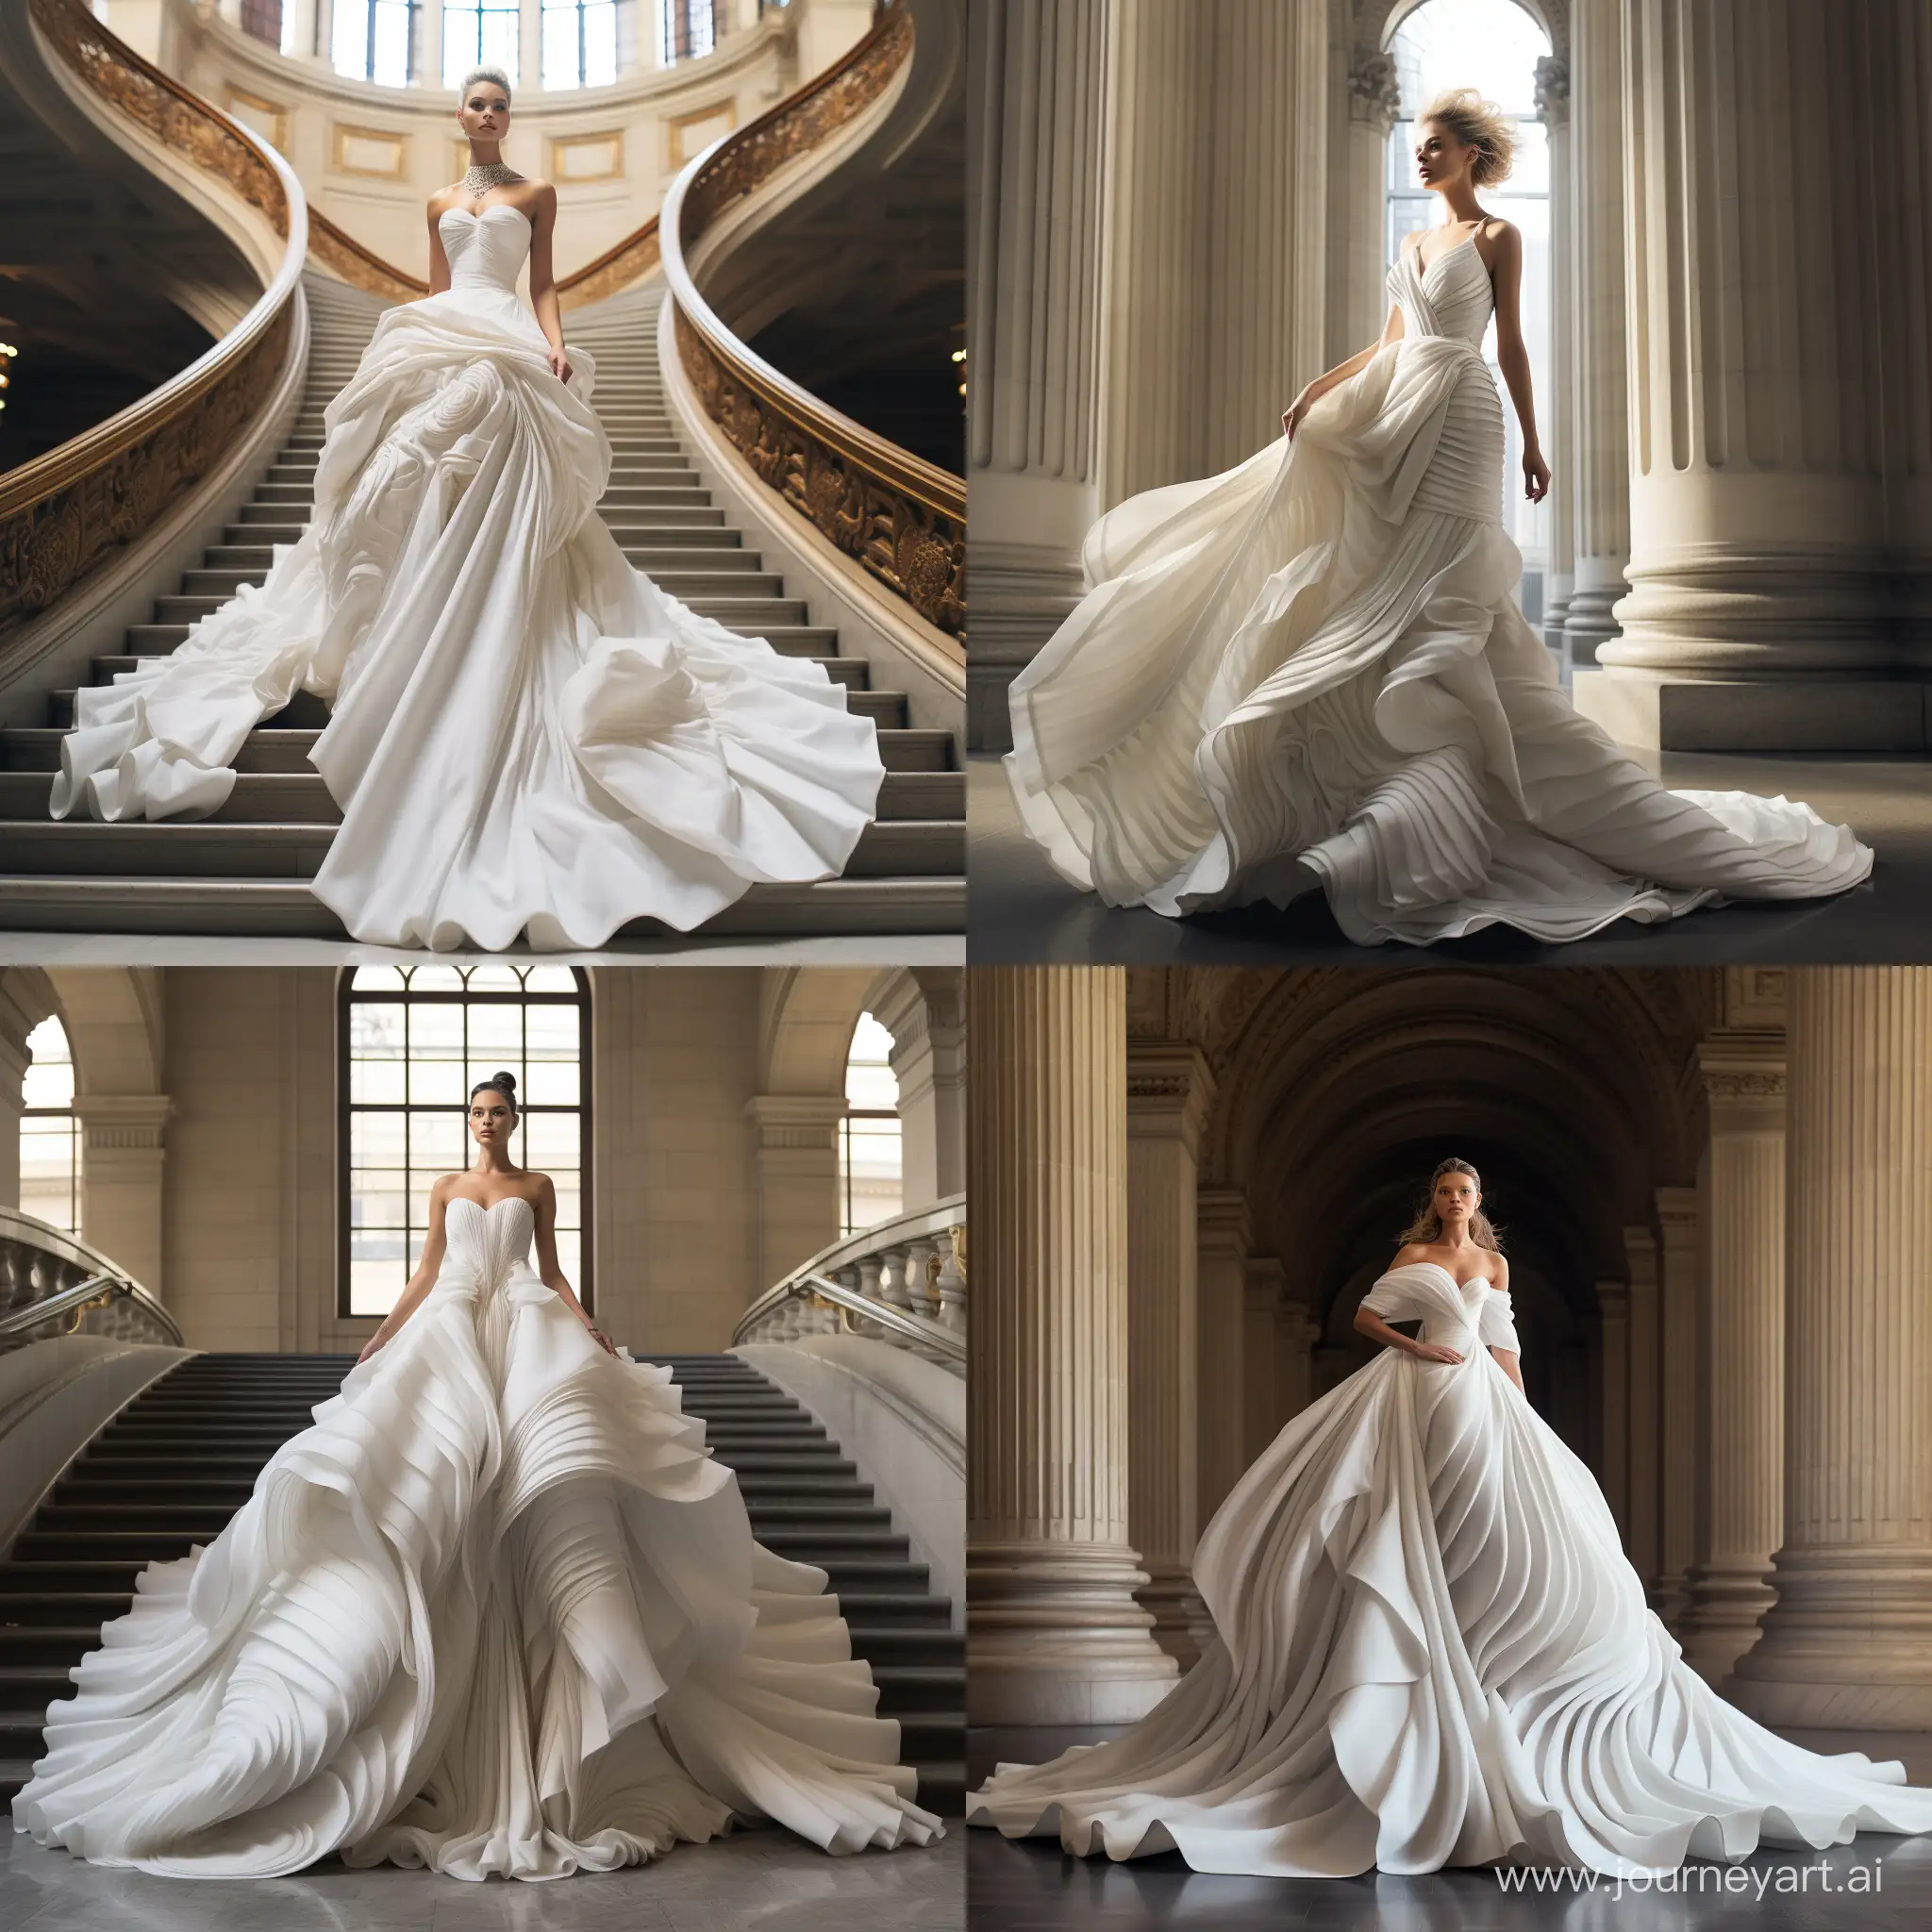 intersection of fashion and architecture in wedding glamour growns